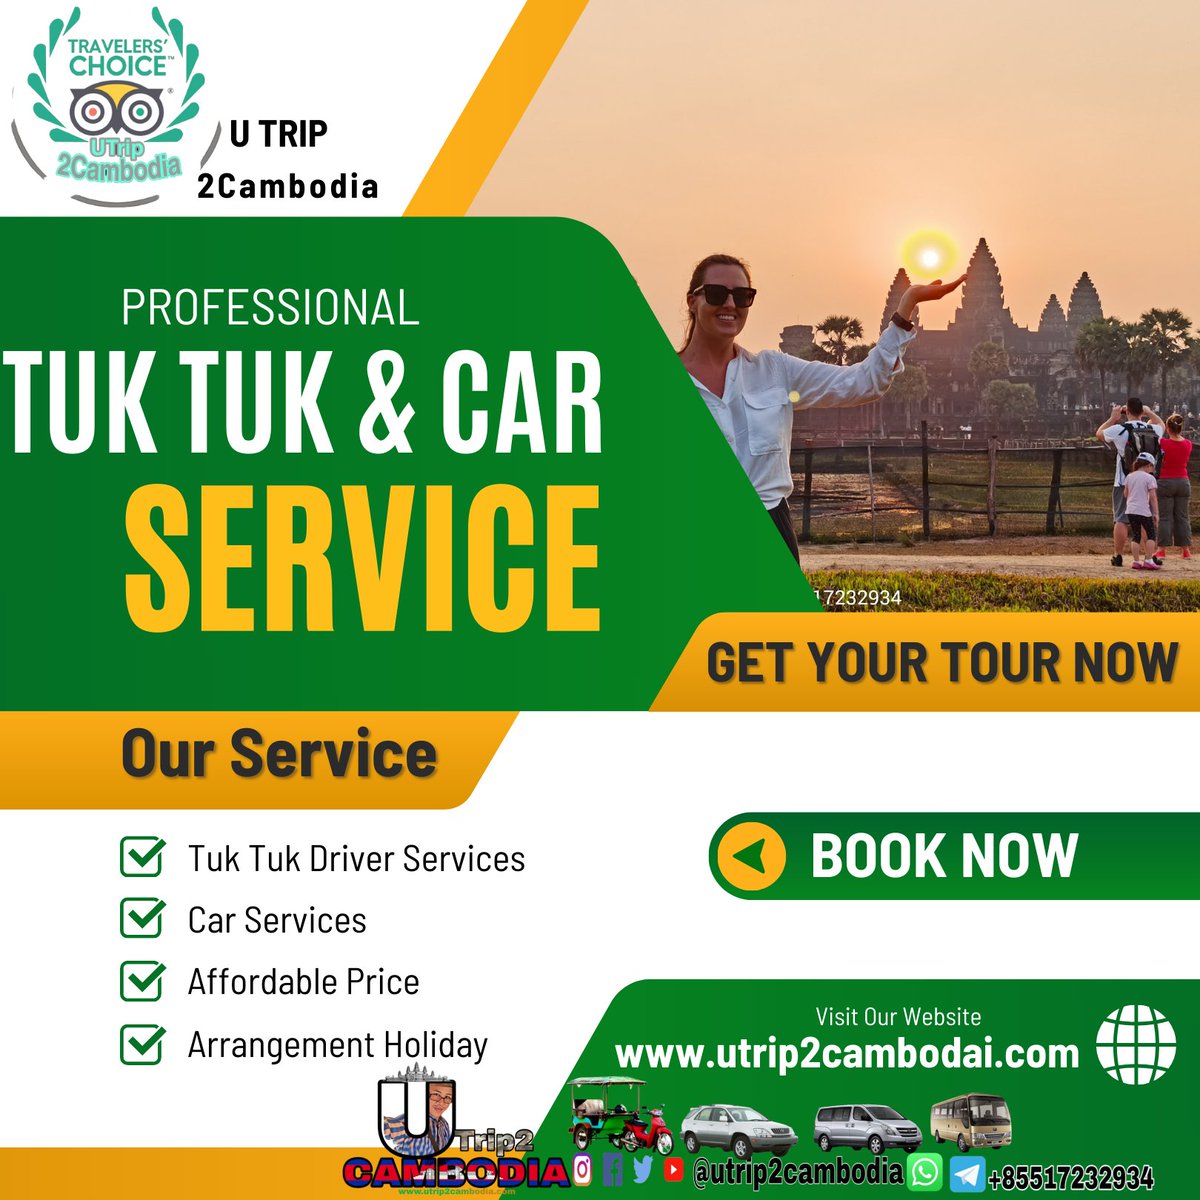 Looking for your friendly & honestly #driver in #siemreapcity of #cambodia to #exploreangkorwat right ? then here we are: #cambodiatransport #utrip2cambodia #angkortuktukdrivertour #angkorsmartydriver #asiantraveler #solotraveler #travelcambodia #traveler

WhatsApp:+85517232934